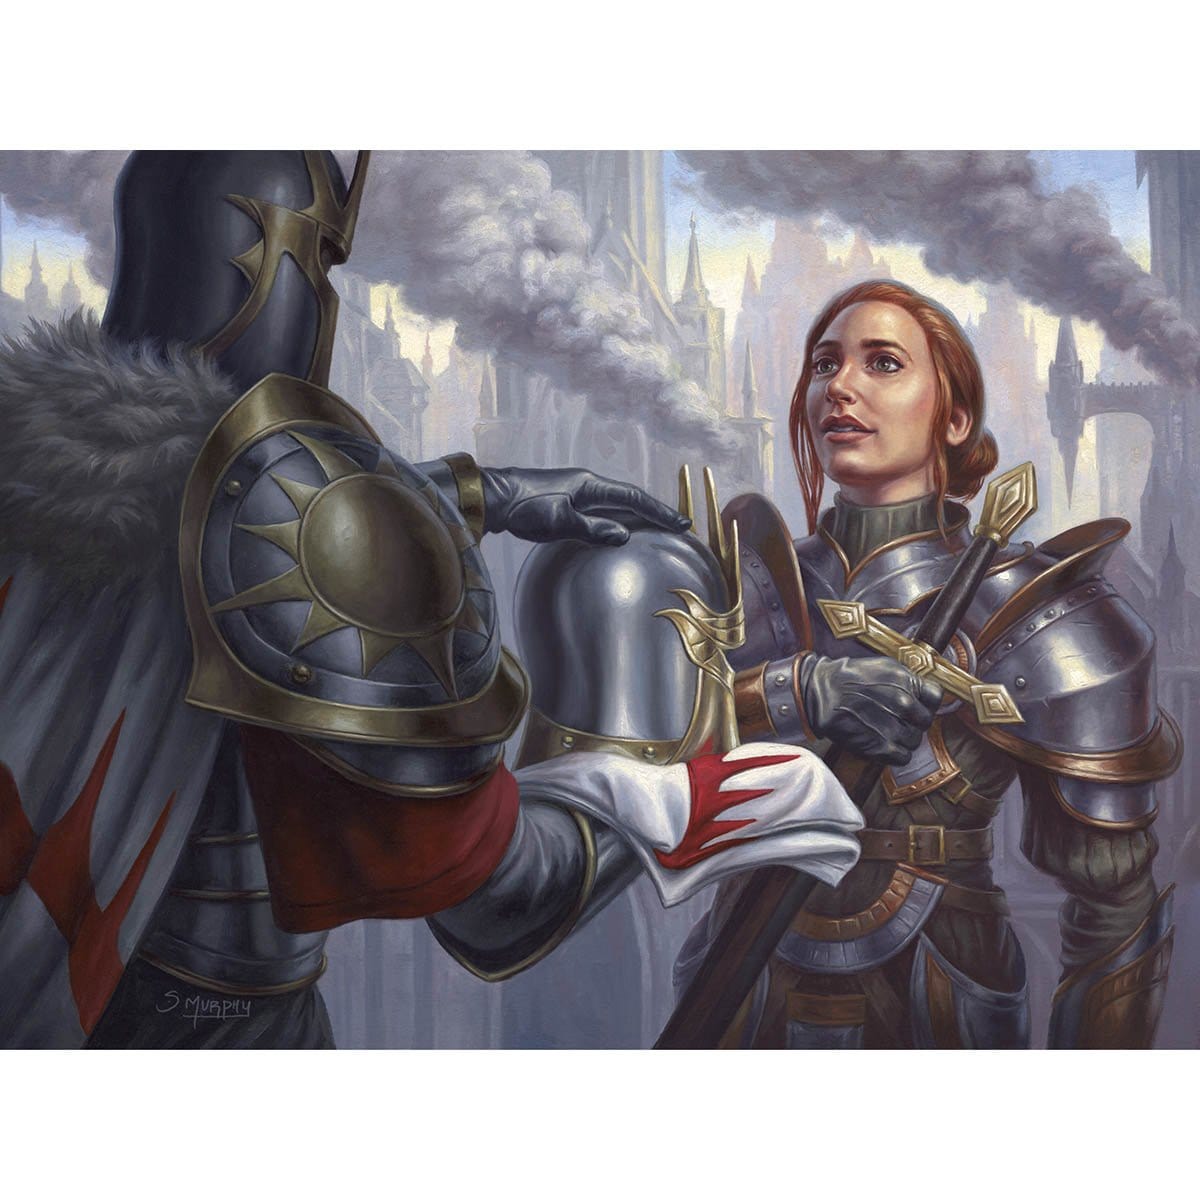 Battlefield Promotion Print - Print - Original Magic Art - Accessories for Magic the Gathering and other card games